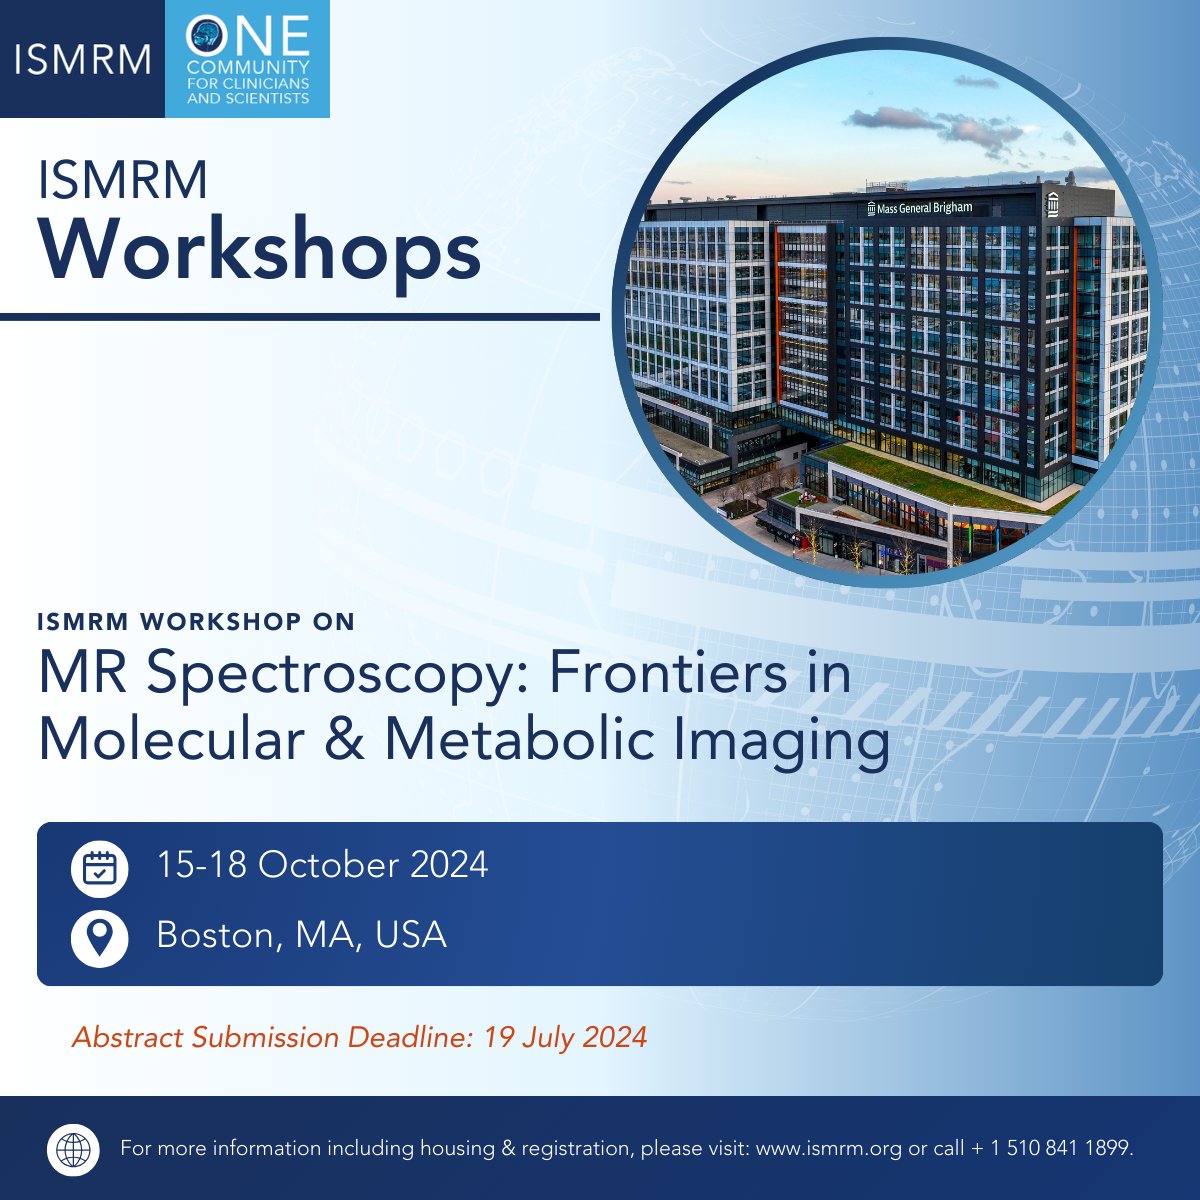 WORKSHOP WEDNESDAY: Call for abstracts & stipend applications for the ISMRM Workshop on MR Spectroscopy: Frontiers in Molecular & Metabolic Imaging is now open: ow.ly/rf9Z50RZaTP Registration coming soon! #ISMRM #ISMRT #MRI #MagneticResonance #MR